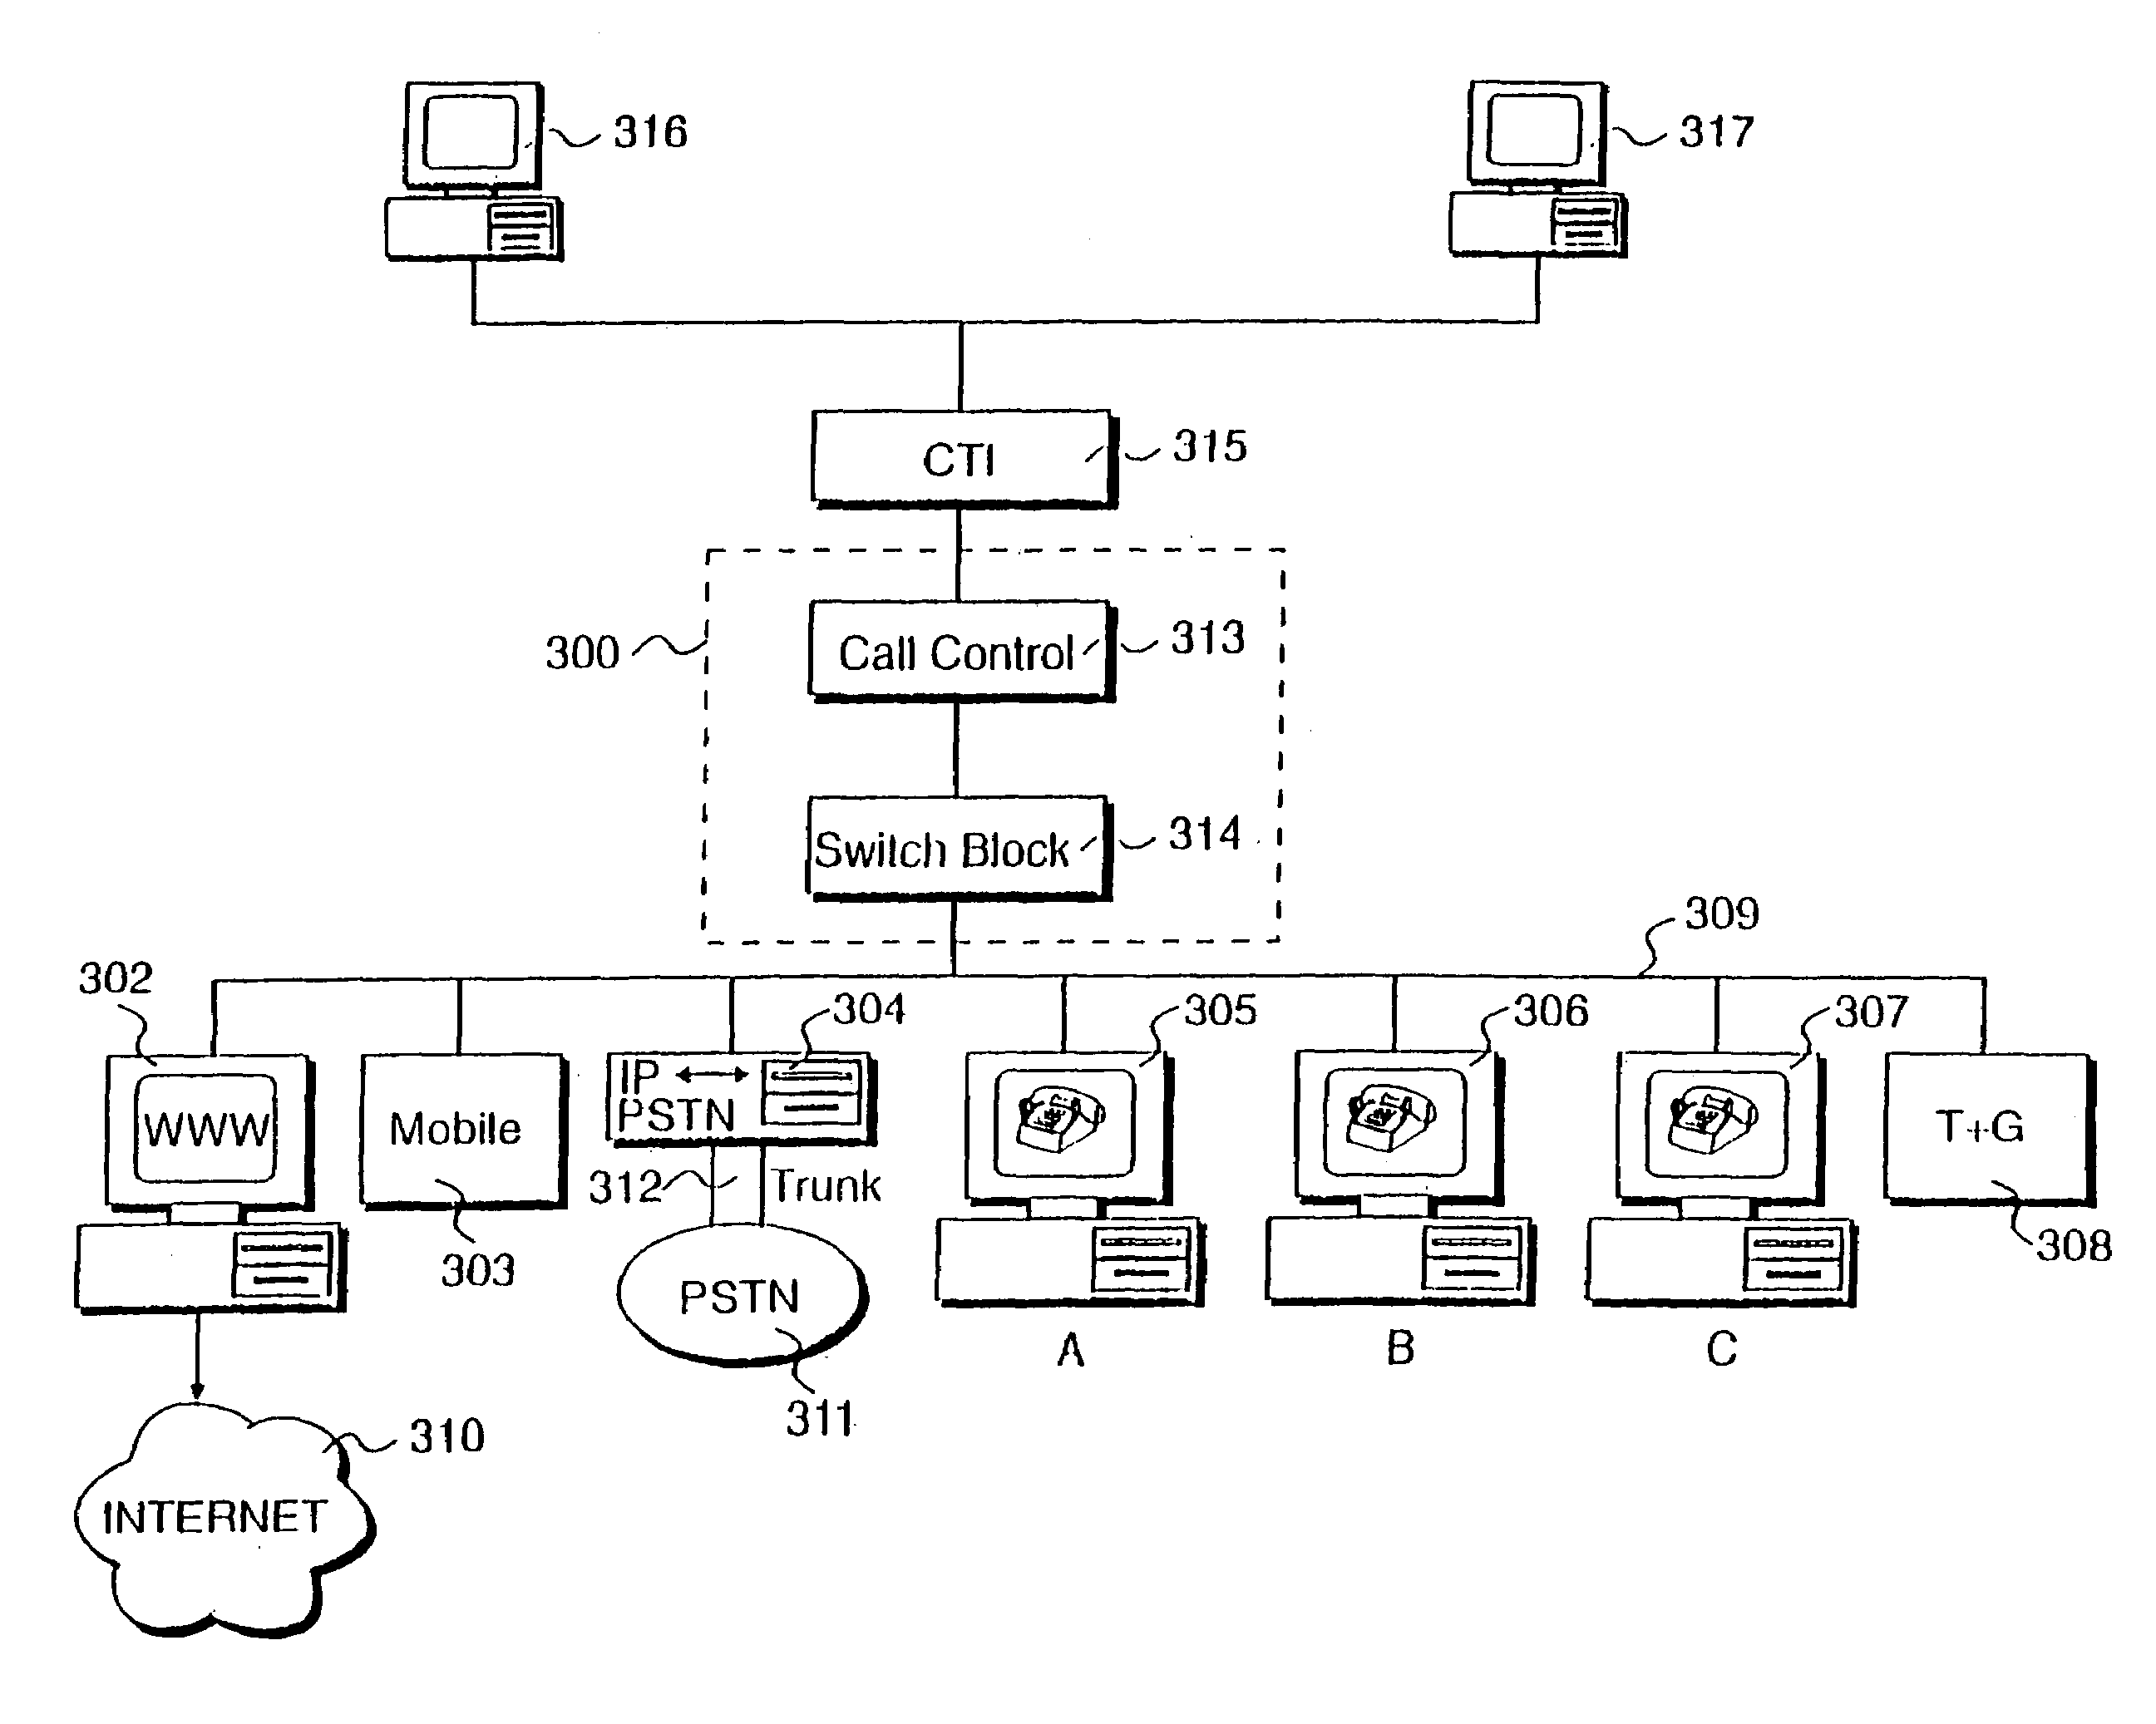 Processing device network